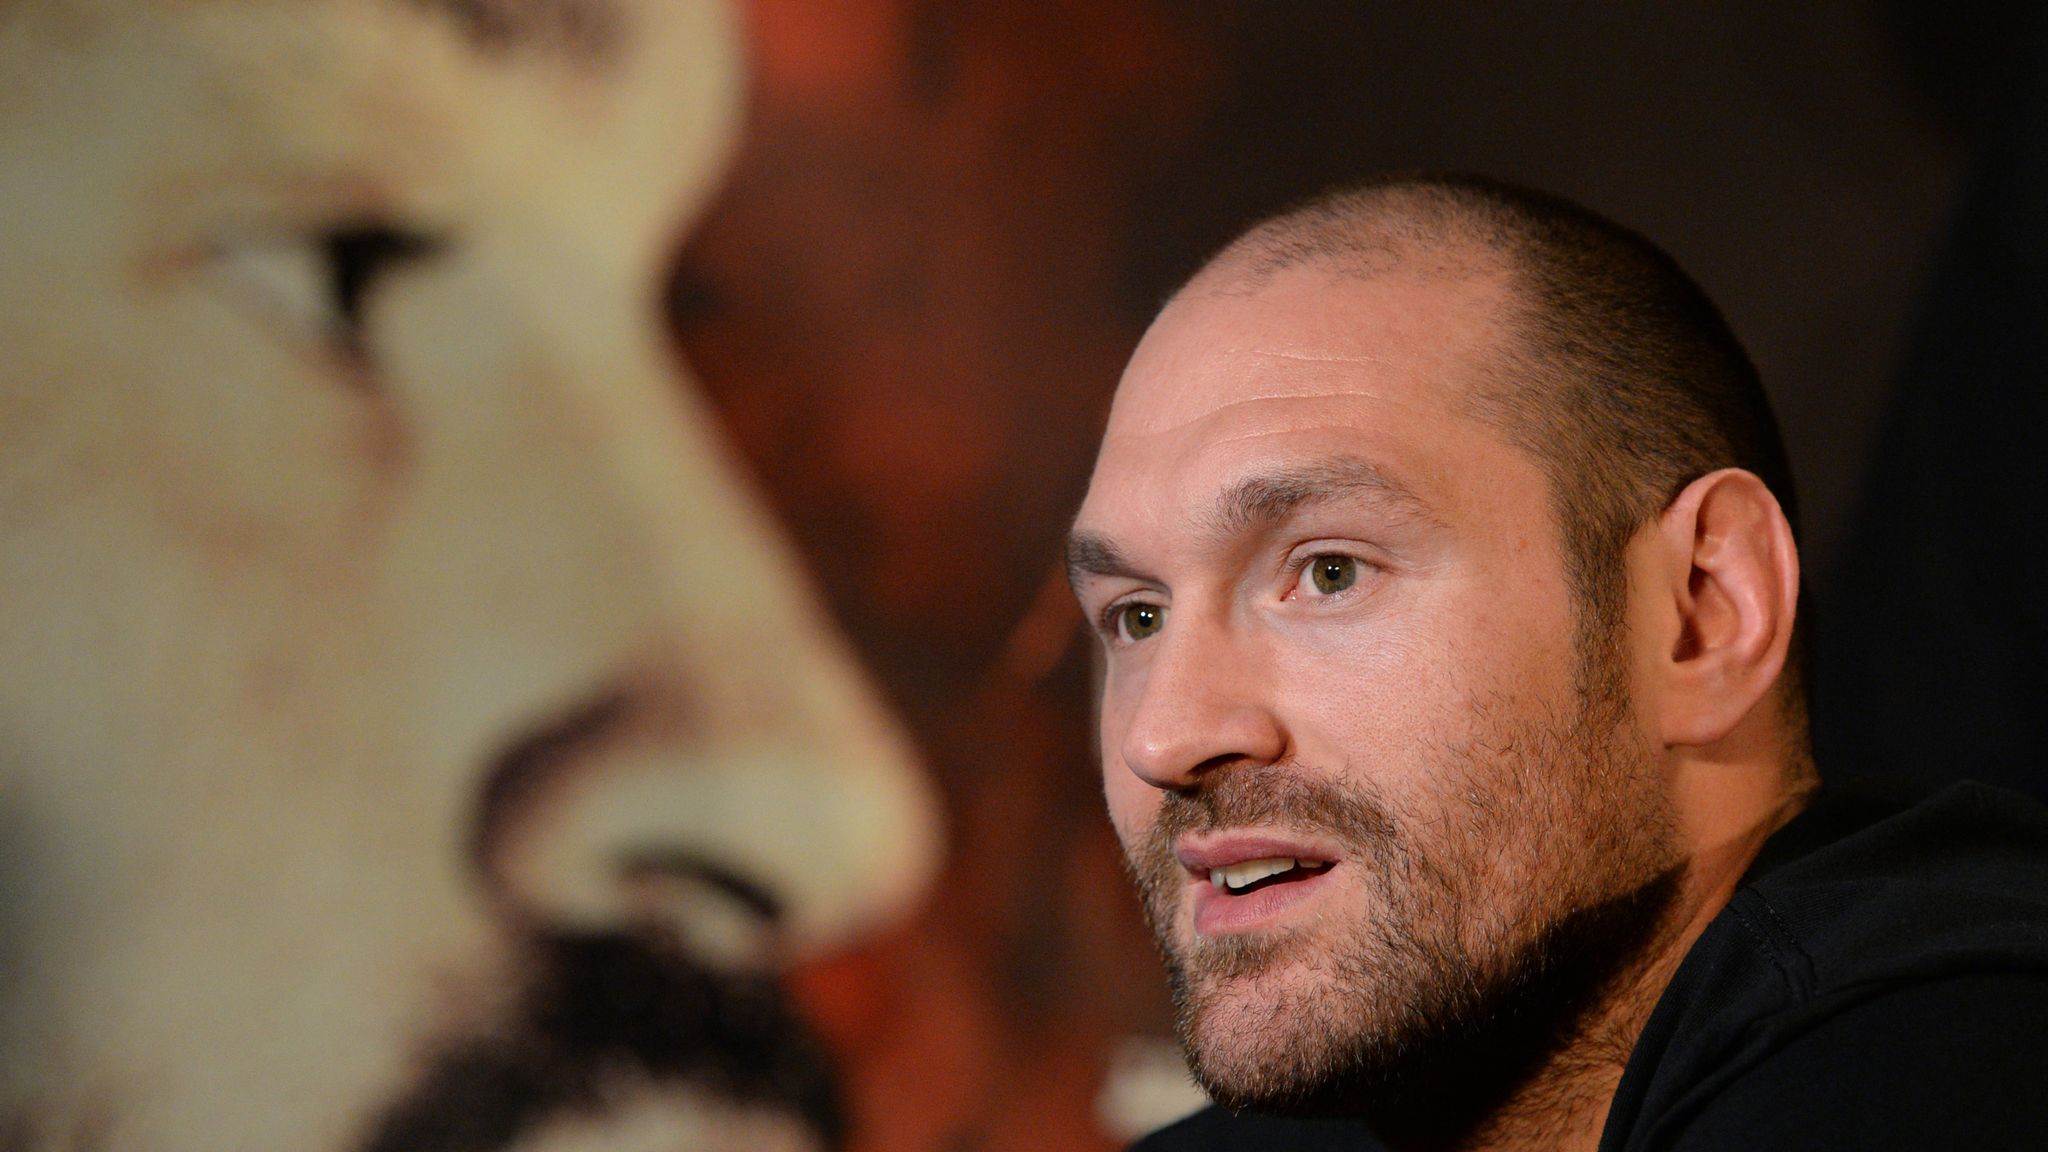 Tyson Fury 'still suspended' amid UKAD case, confirms BBBofC and BUI ...